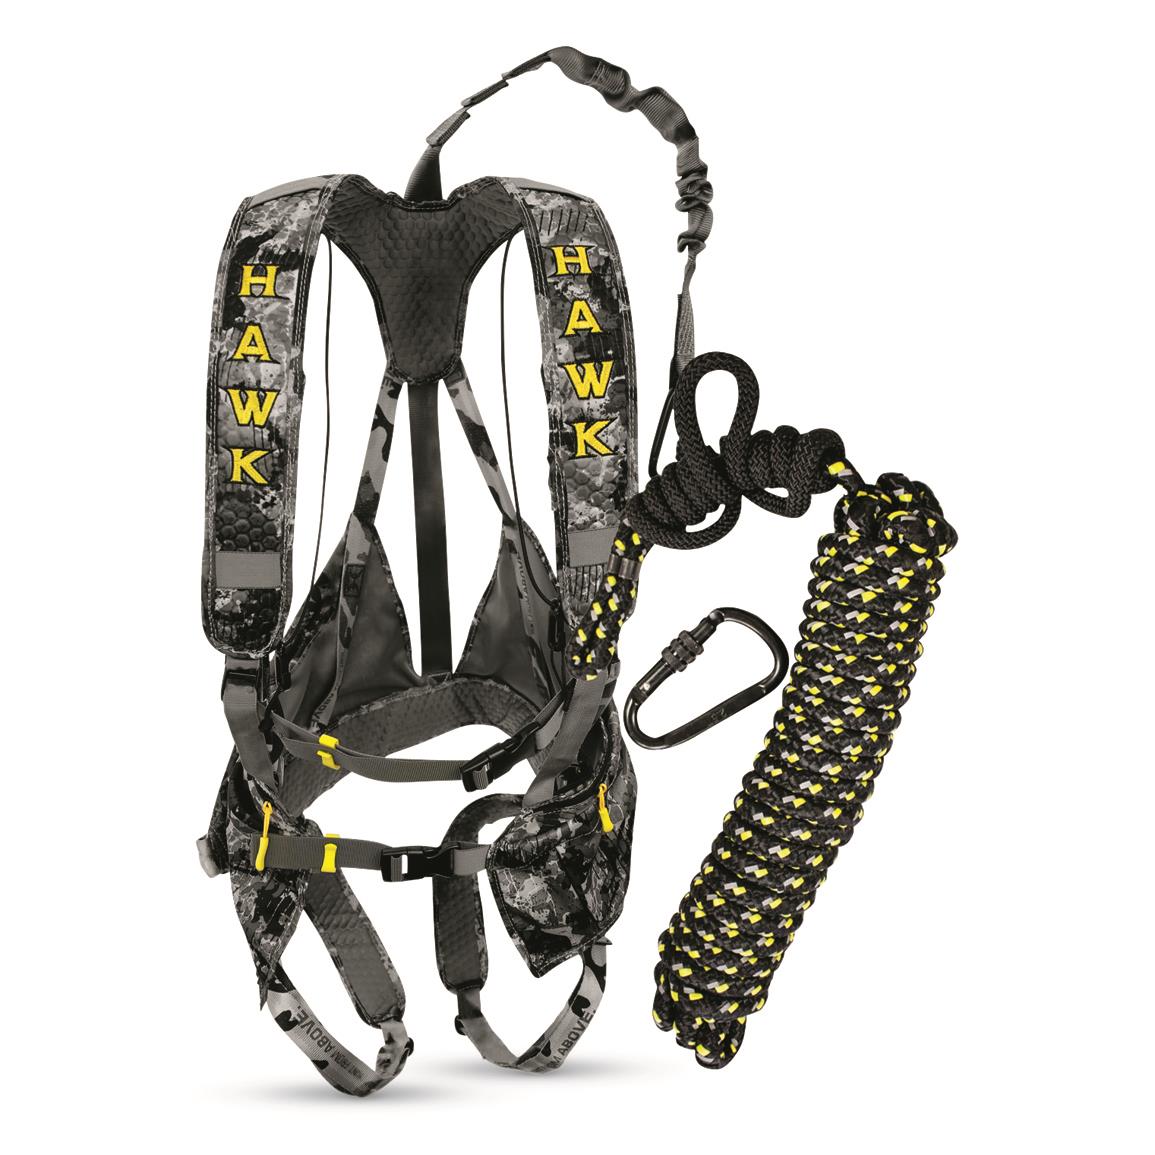 Hawk Elevate Pro Safety Harness & Safety-Line Combo